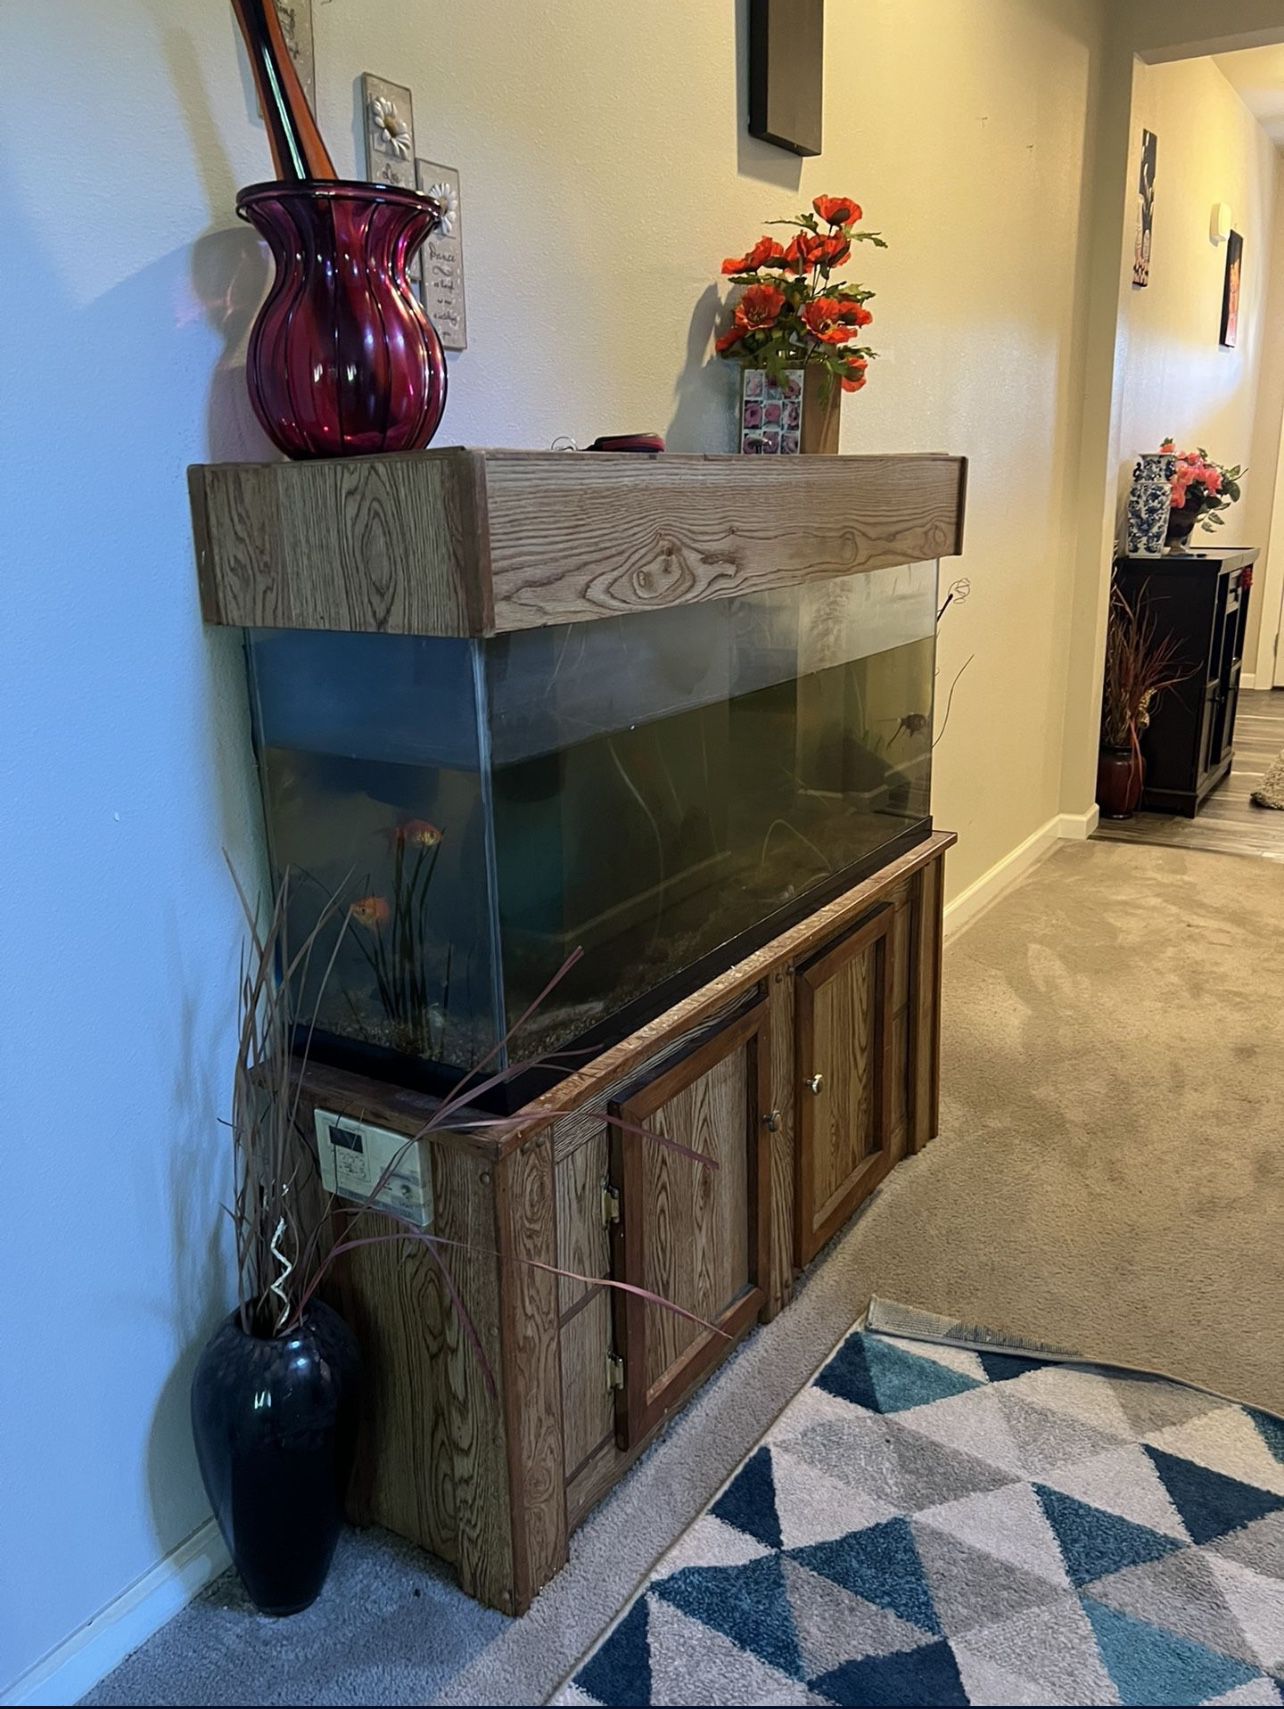 55 Gallons With Fish 